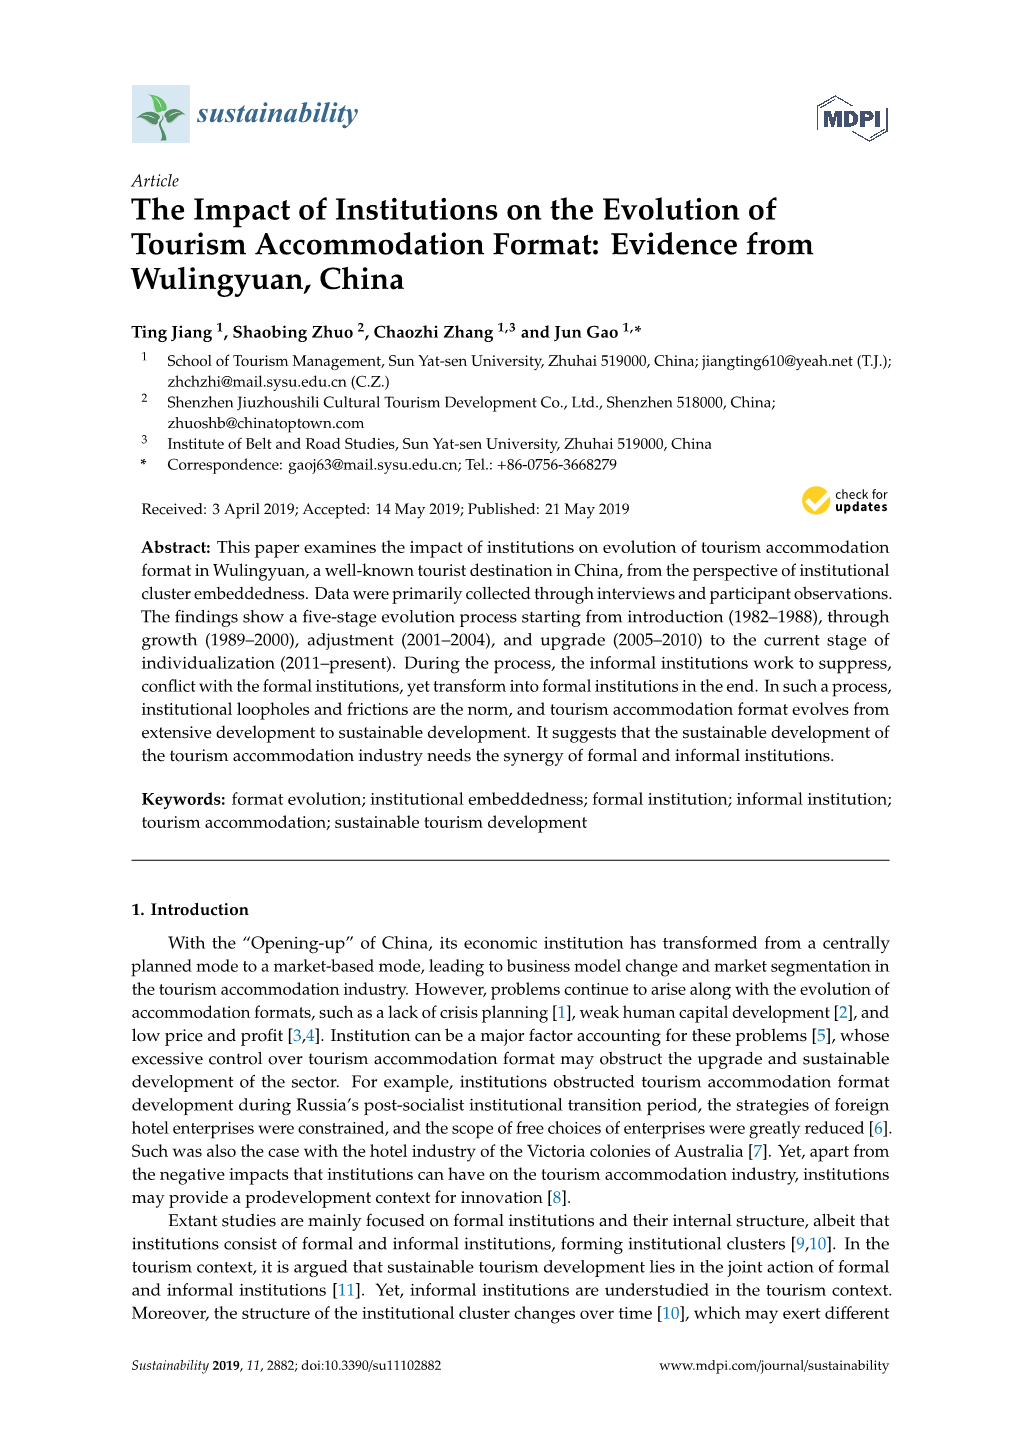 The Impact of Institutions on the Evolution of Tourism Accommodation Format: Evidence from Wulingyuan, China